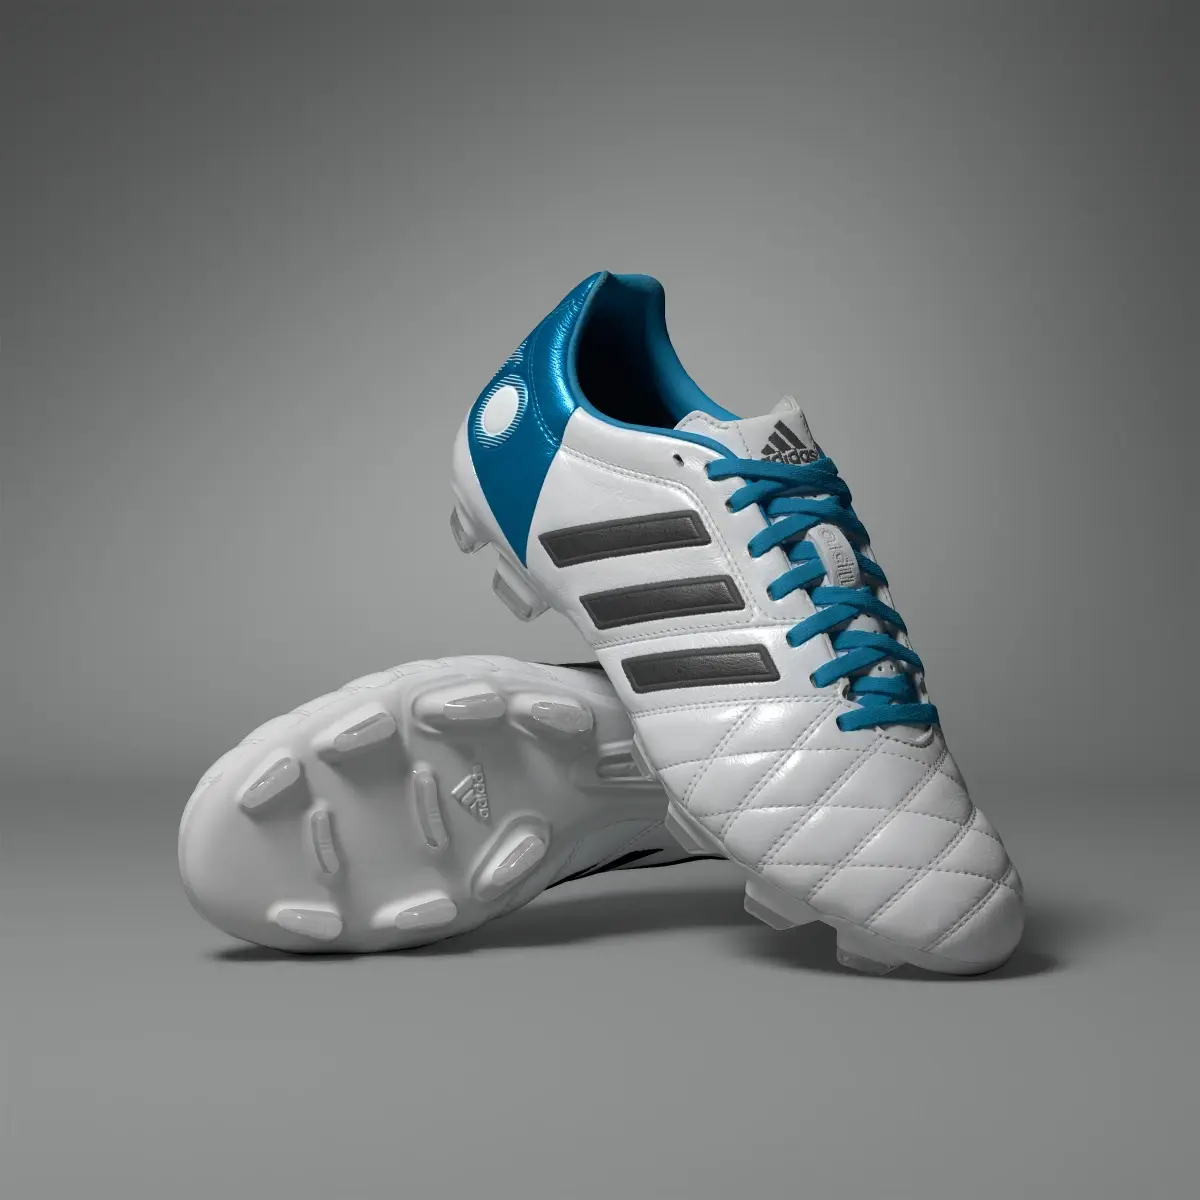 Adidas 11Pro Toni Kroos Firm Ground Boots. 1